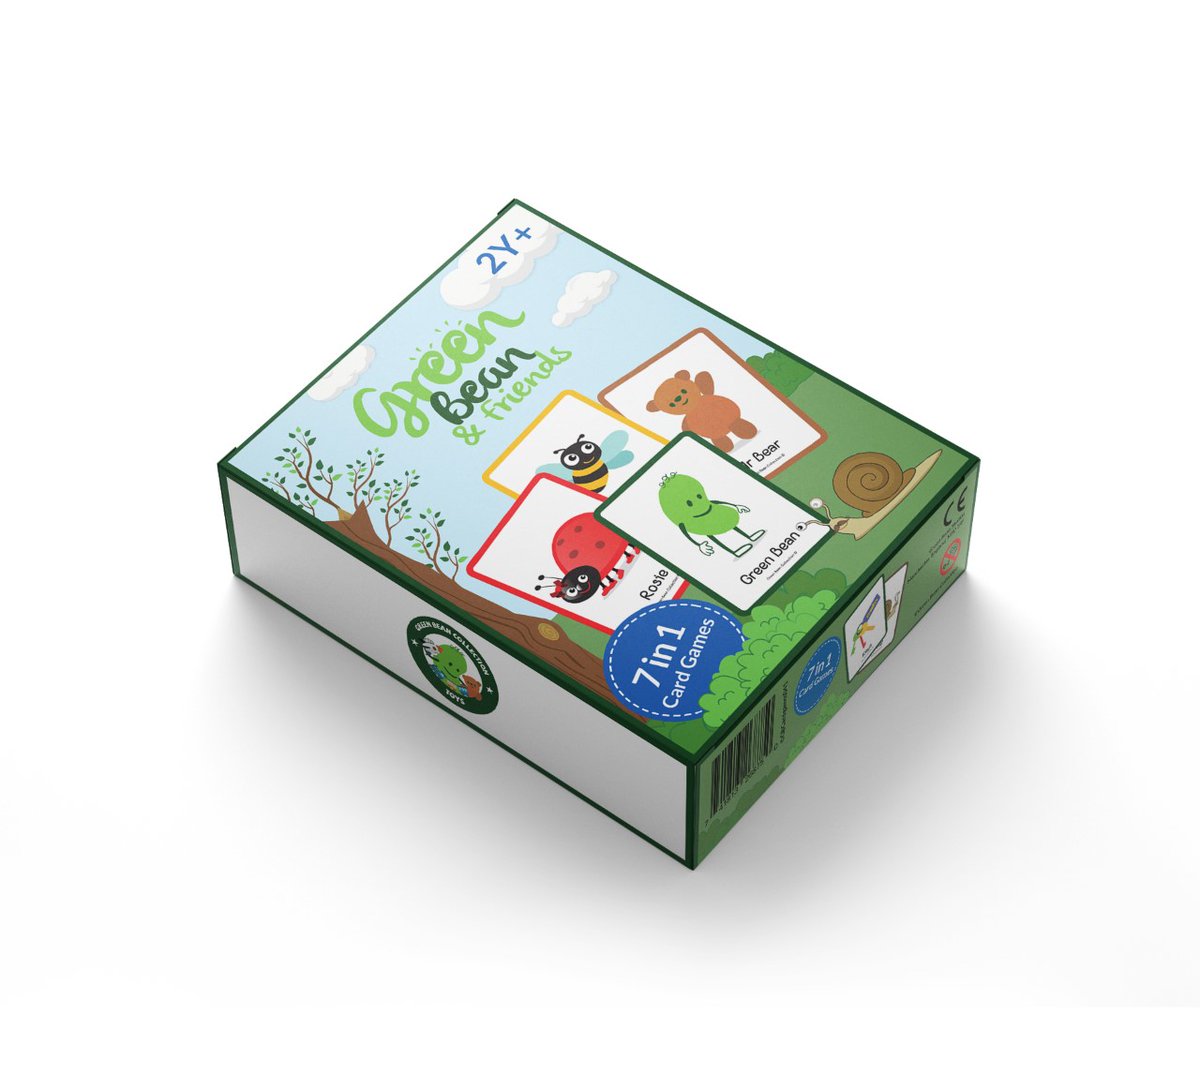 7 exciting card games rolled into 1 compact box! Ideal for popping in your bag to take to the park or on holiday. lnkd.in/e6KUqcM #greenbeancollection #kids #ecotoys